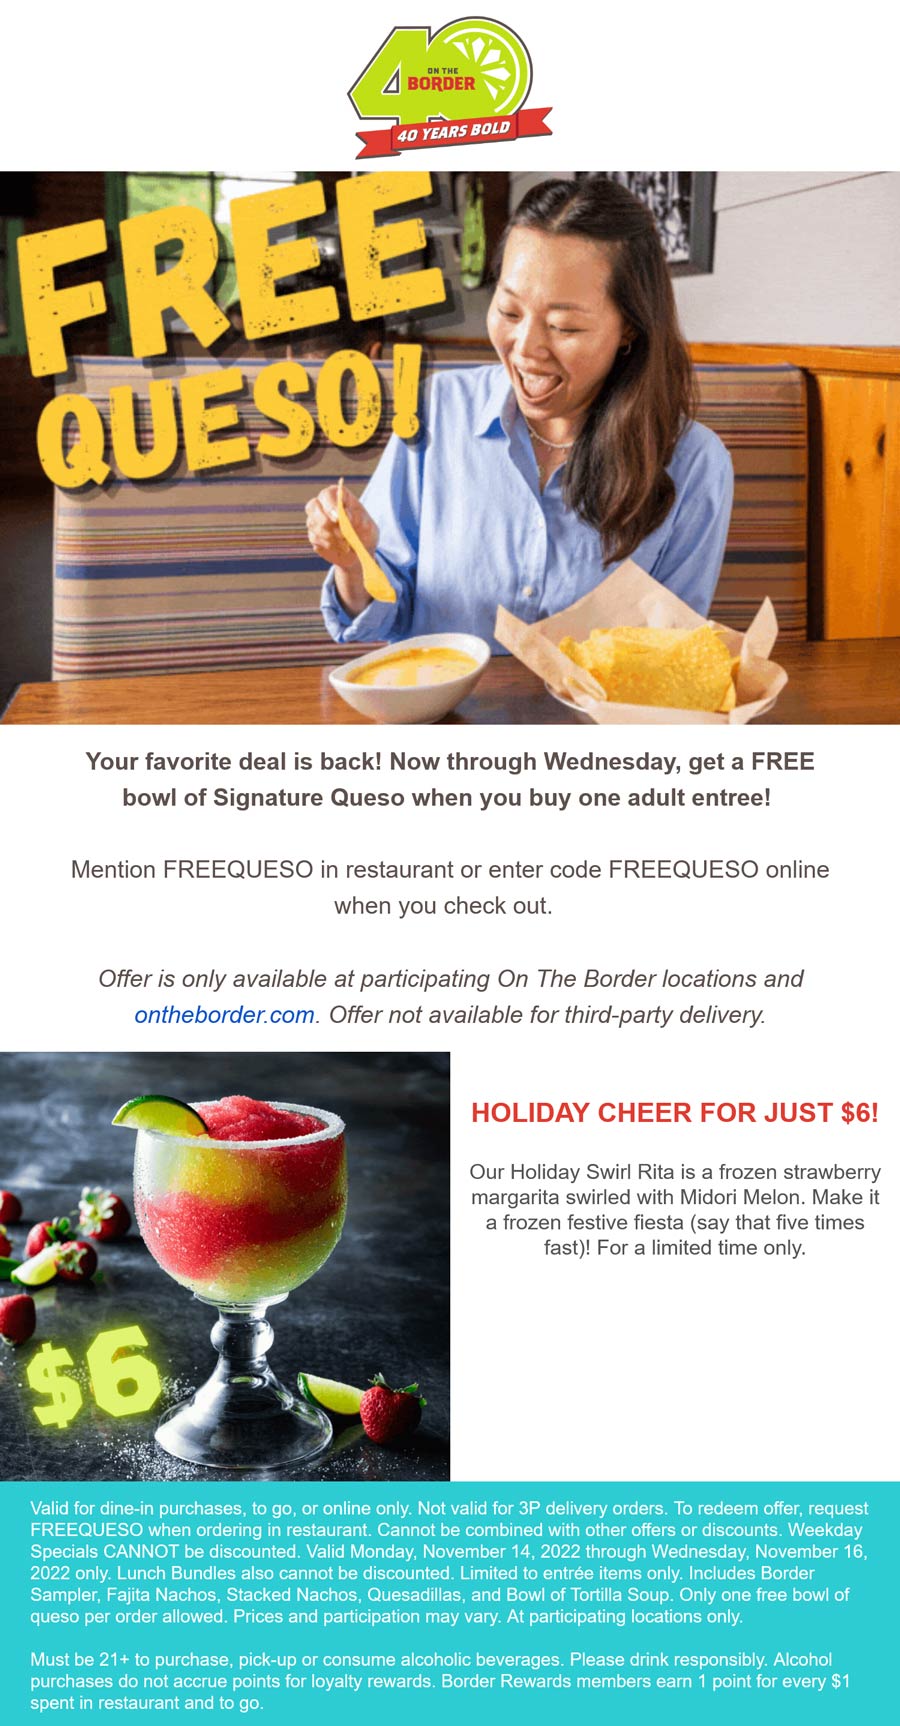 On The Border restaurants Coupon  Free bowl of queso with your entree at On The Border via promo code FREEQUESO #ontheborder 